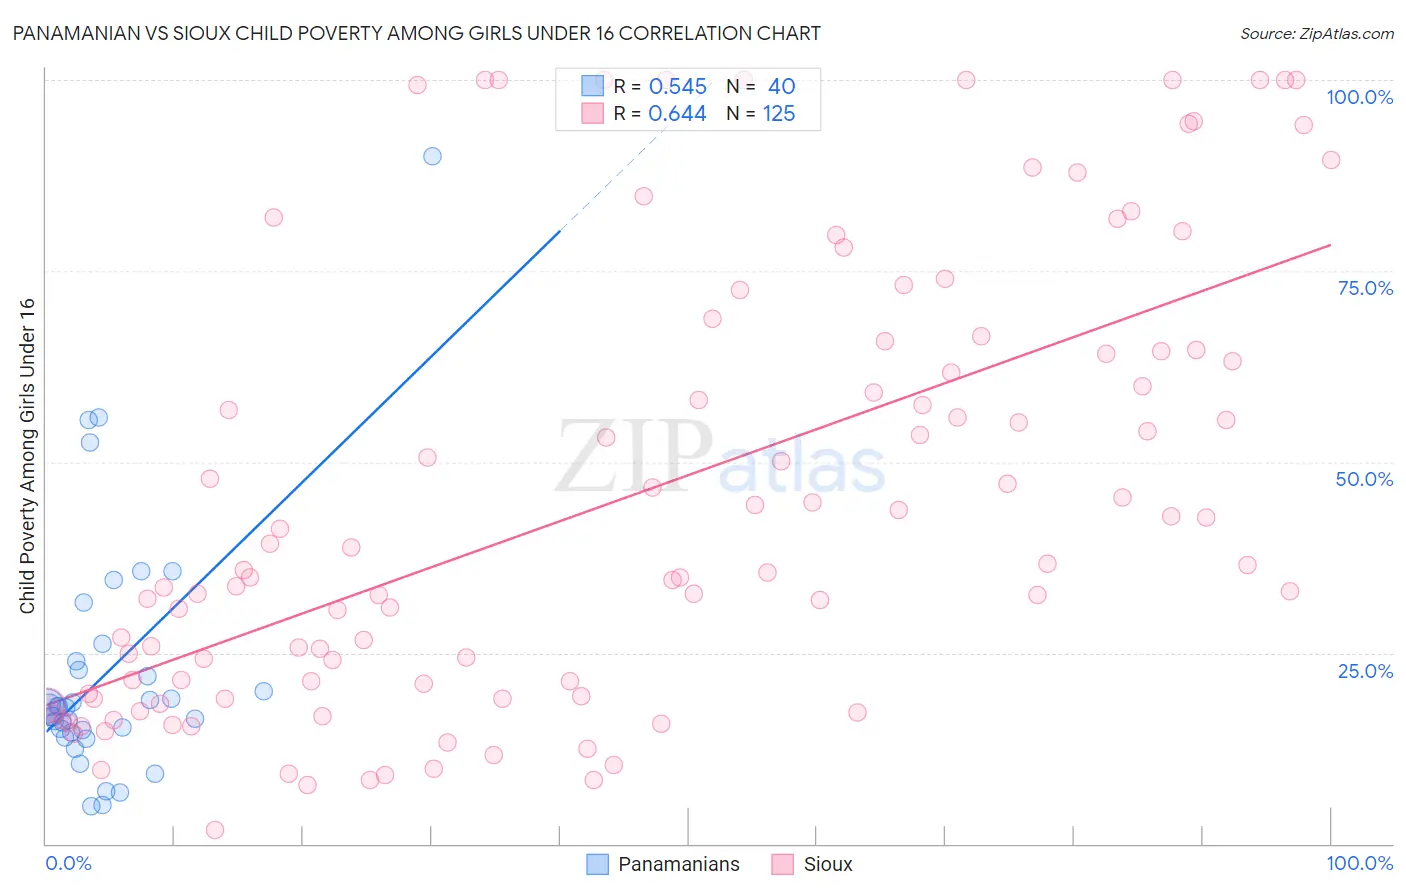 Panamanian vs Sioux Child Poverty Among Girls Under 16